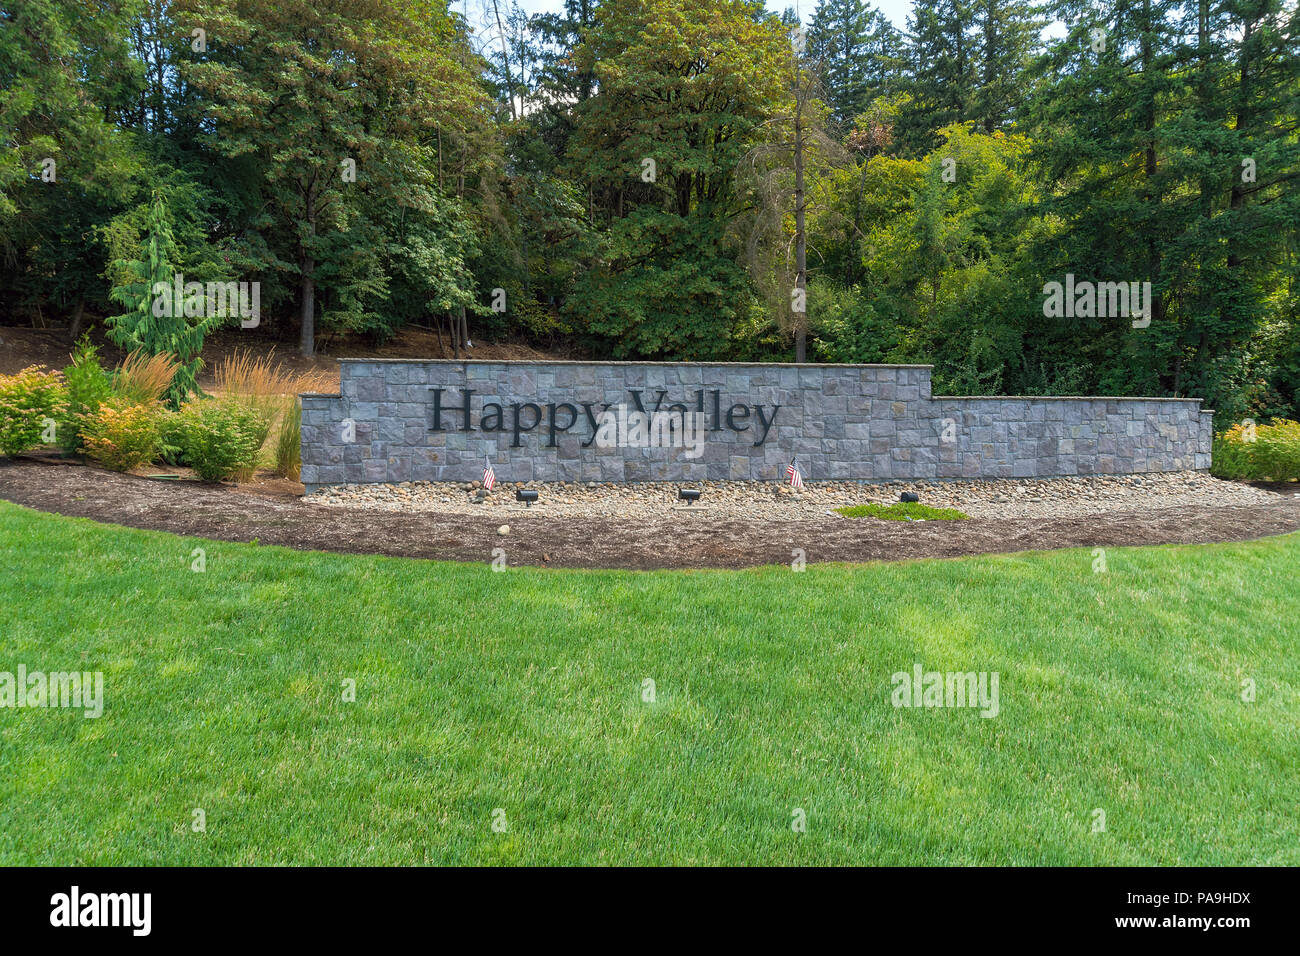 City of Happy Valley Oregon stone wall sign in the park with green grass lawn landscaping Stock Photo